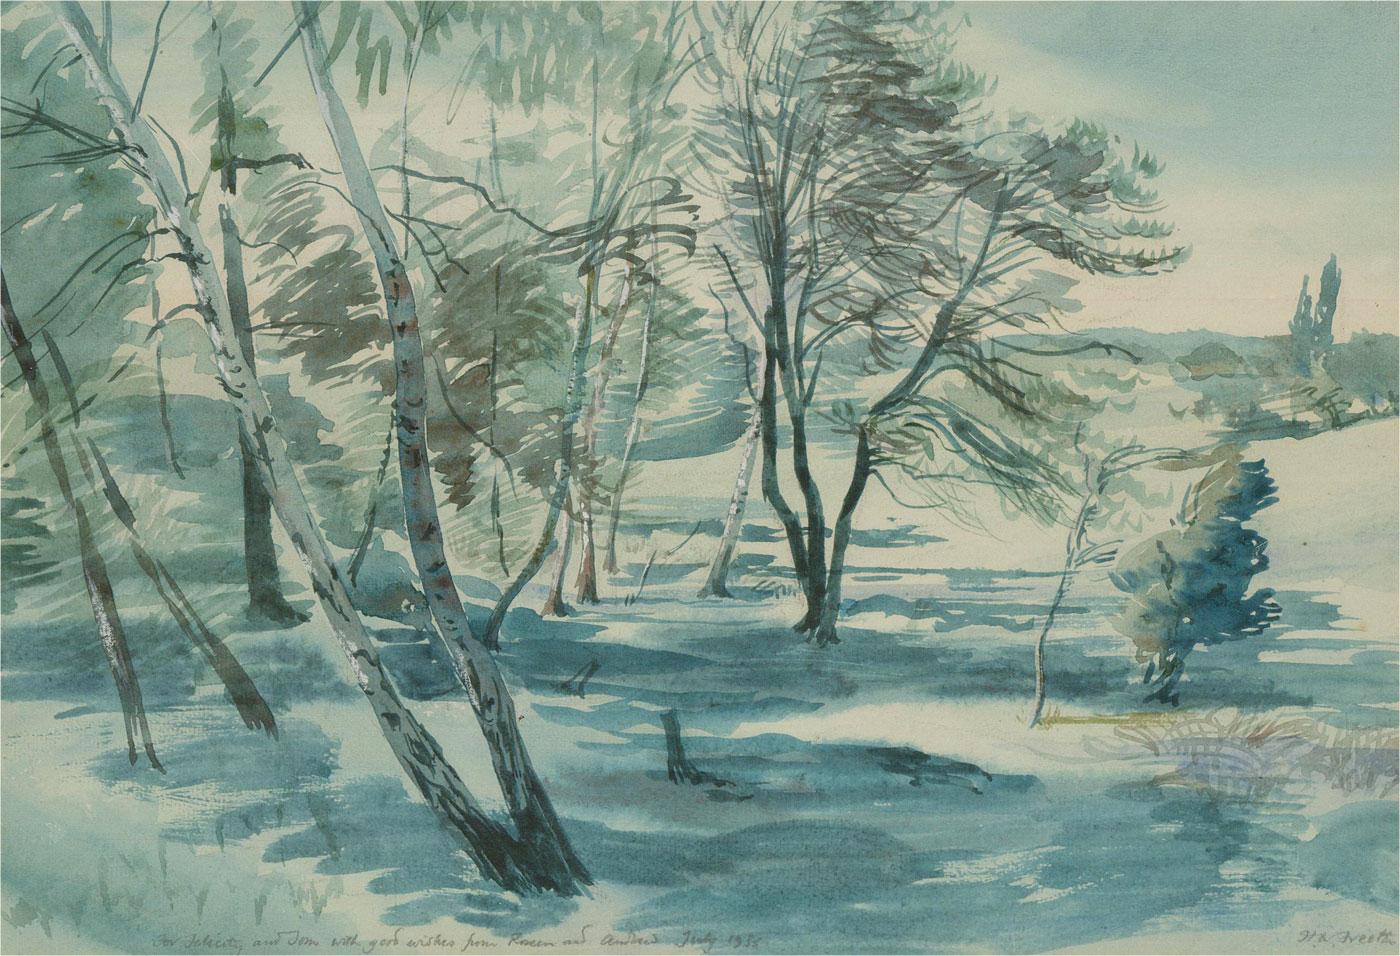 A rural scene in watercolour with gouache details by the well-listed British artist H. Andrew Freeth. Signed to the lower right-hand corner. Inscribed to the lower margin: 'For Felicity and John with good wishes from Roseen and Andrew, July 1955',